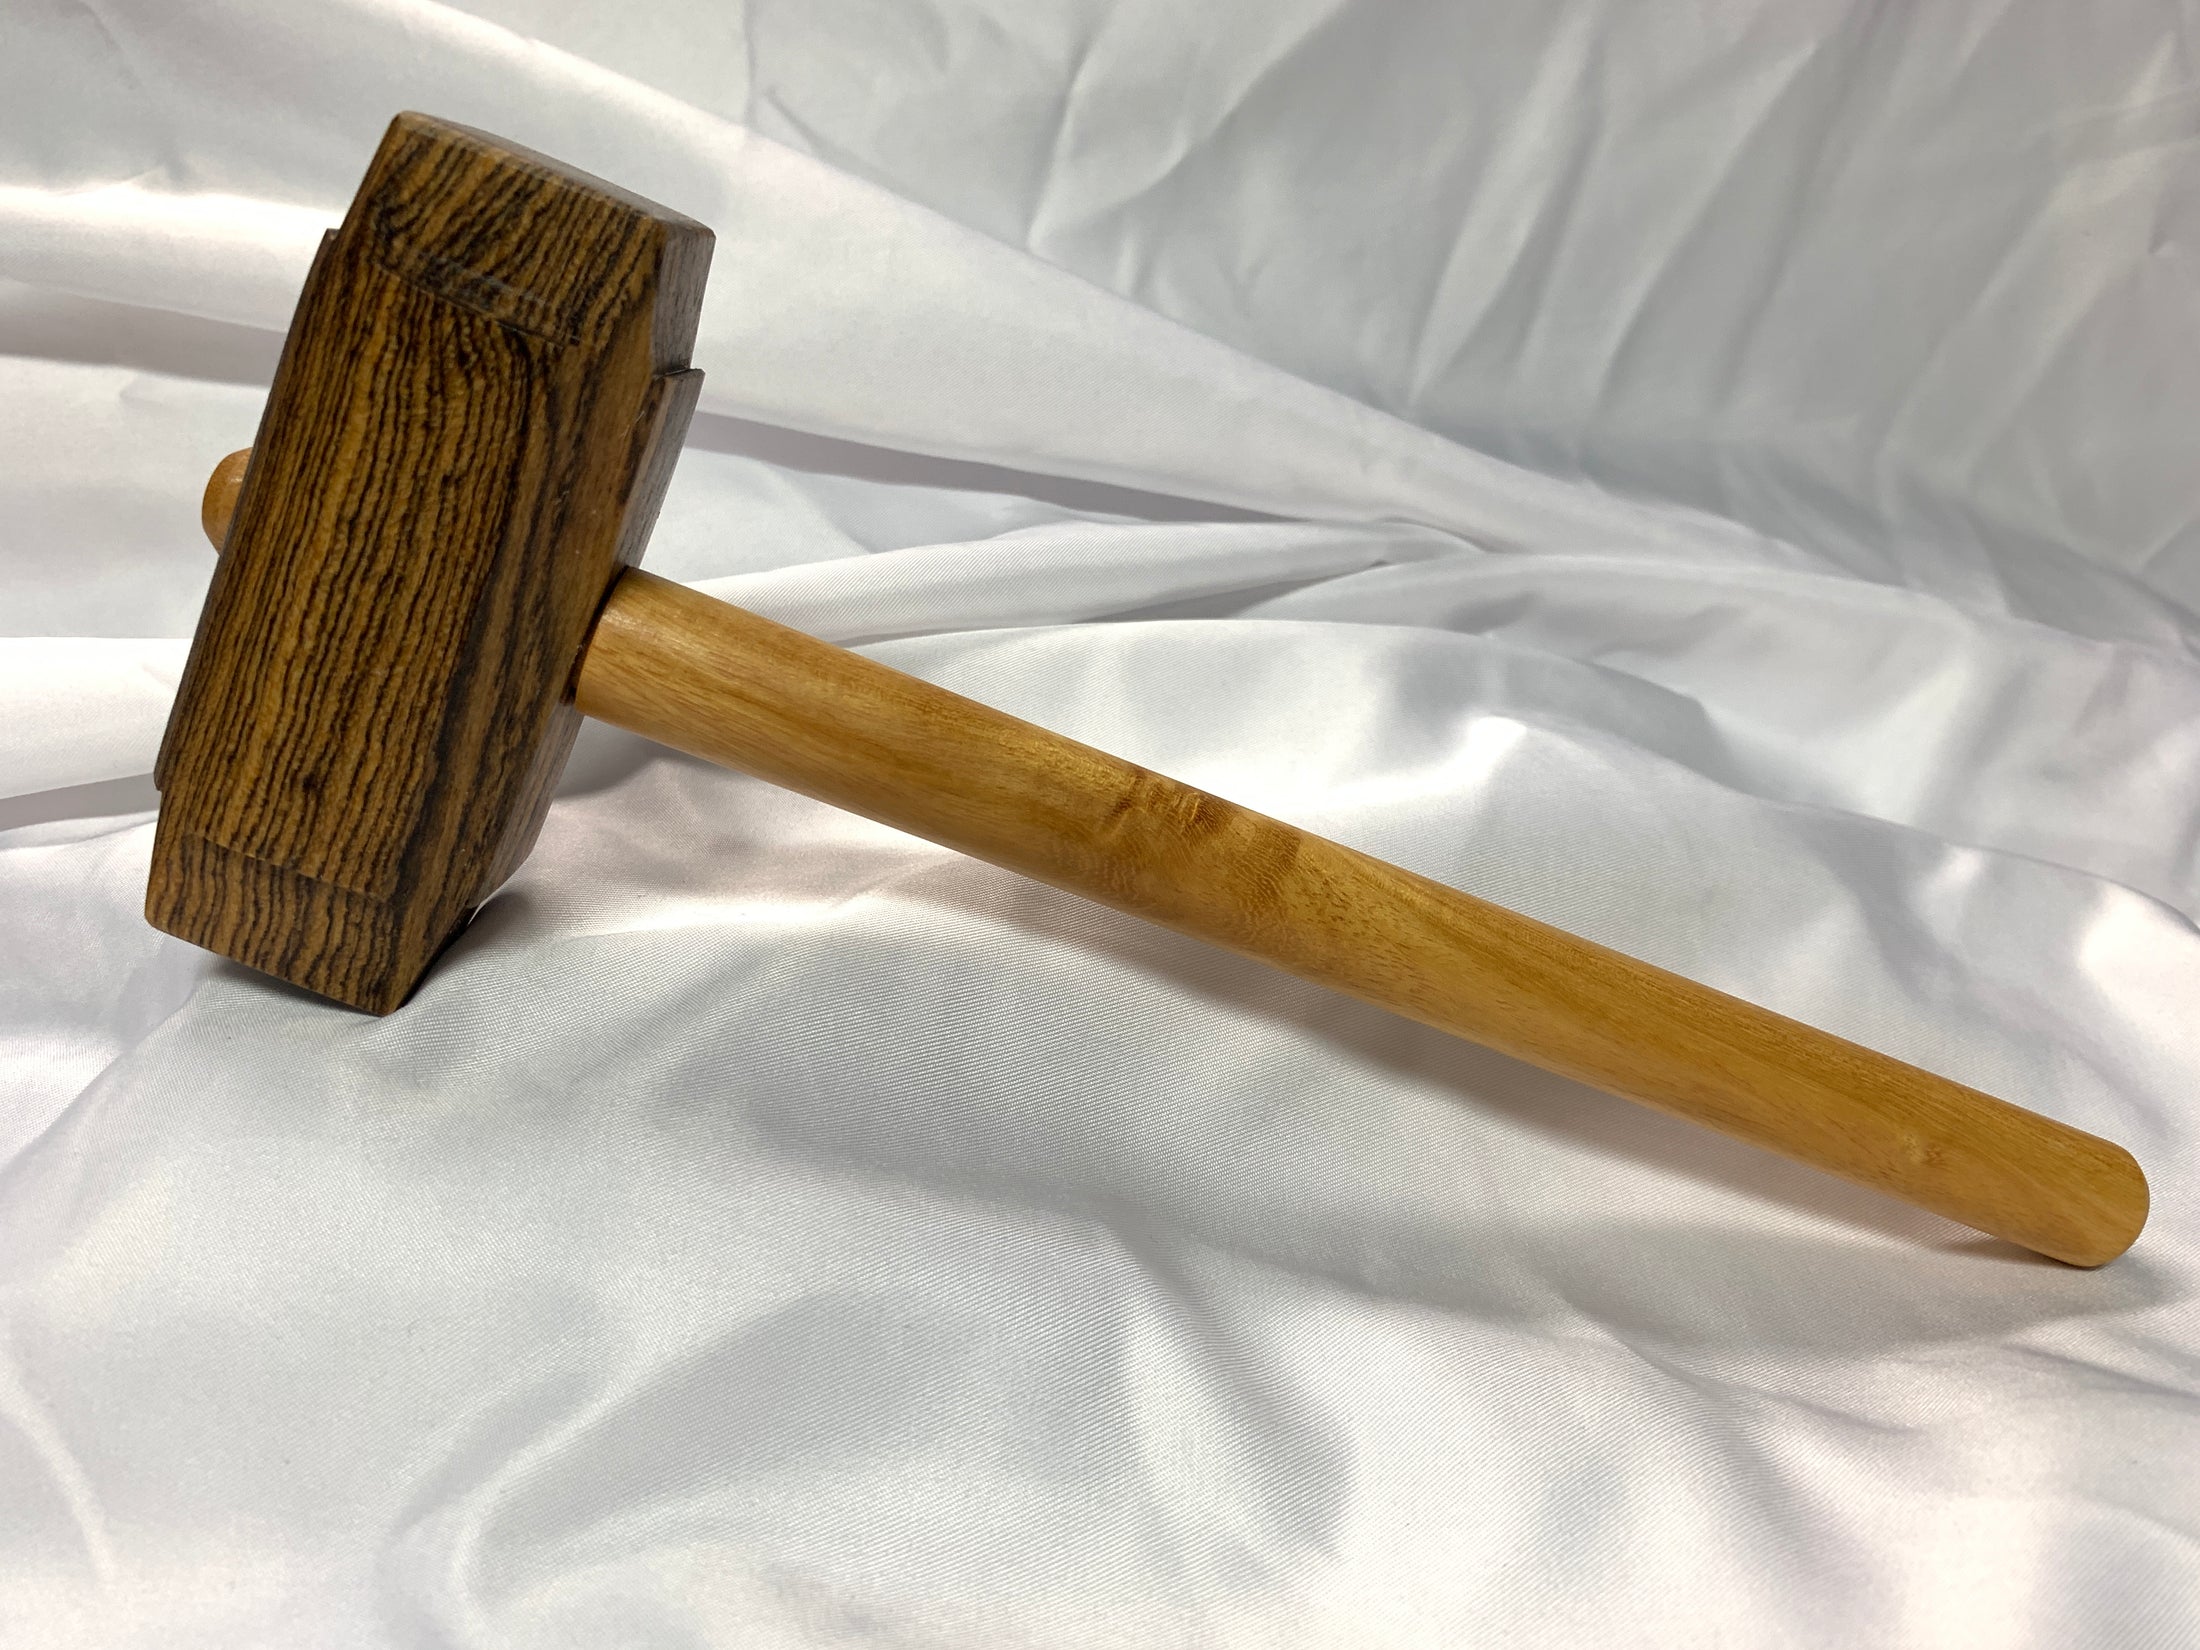 Thors Hammer Woodworking Mallet Bocote Head with Osage Orange Handle Kings Fine Woodworking